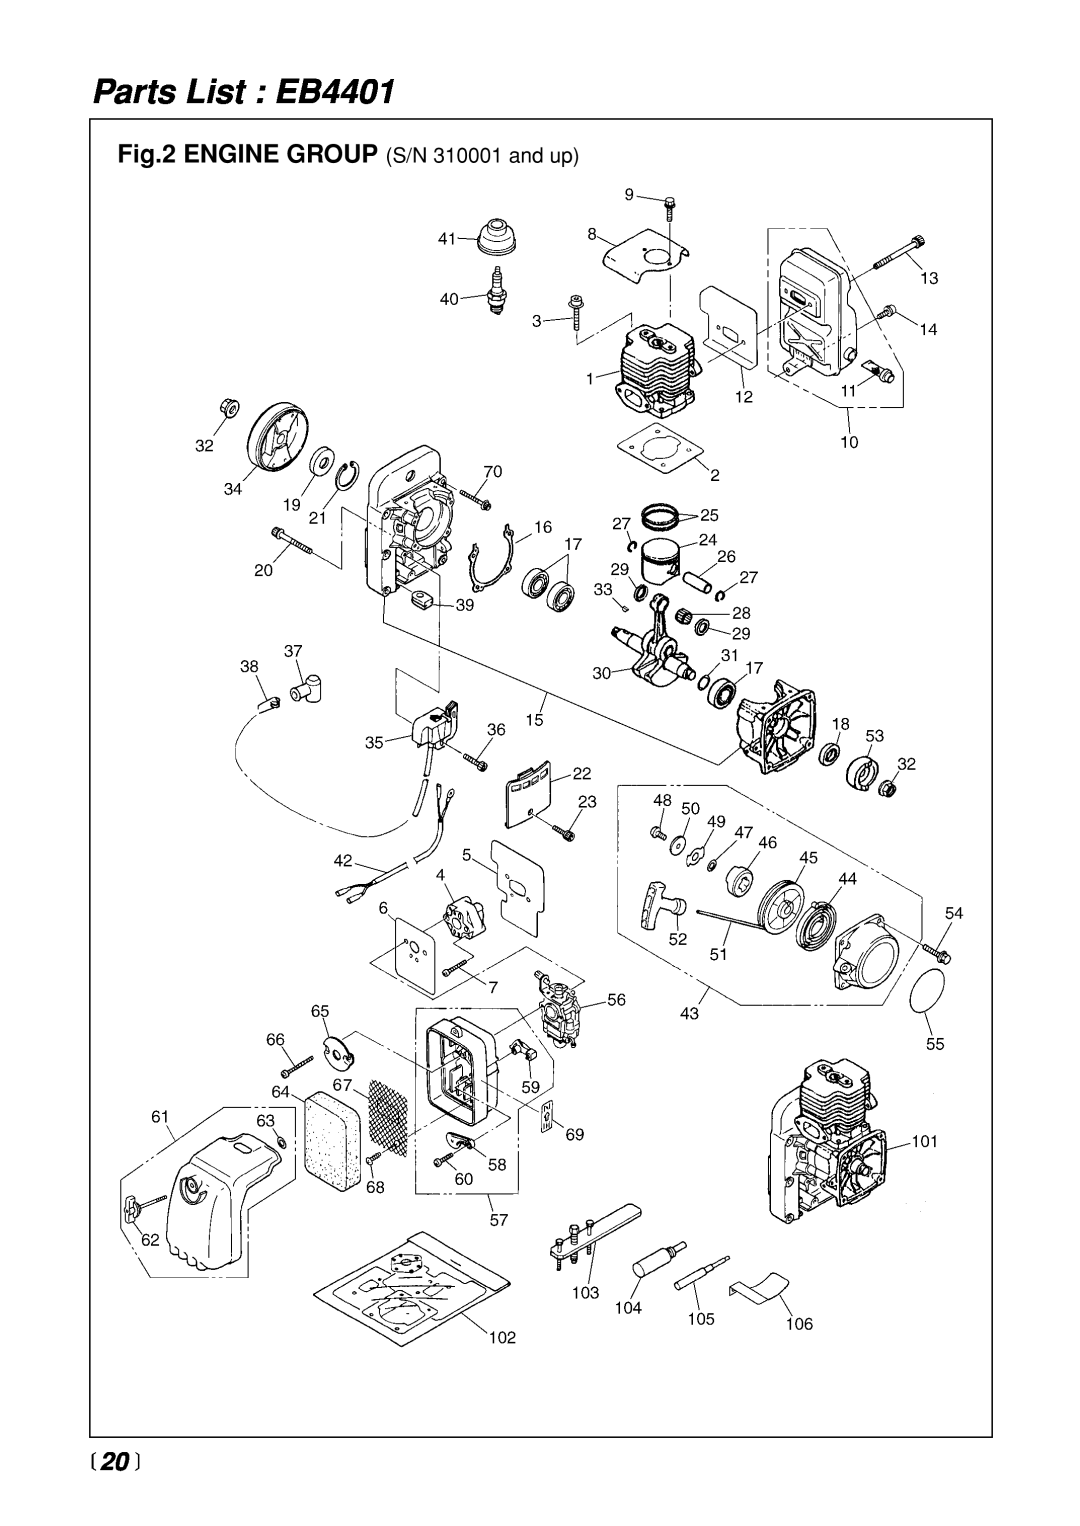 Zenoah manual Parts List EB4401, ENGINE GROUP S/N 310001 and up,  20  